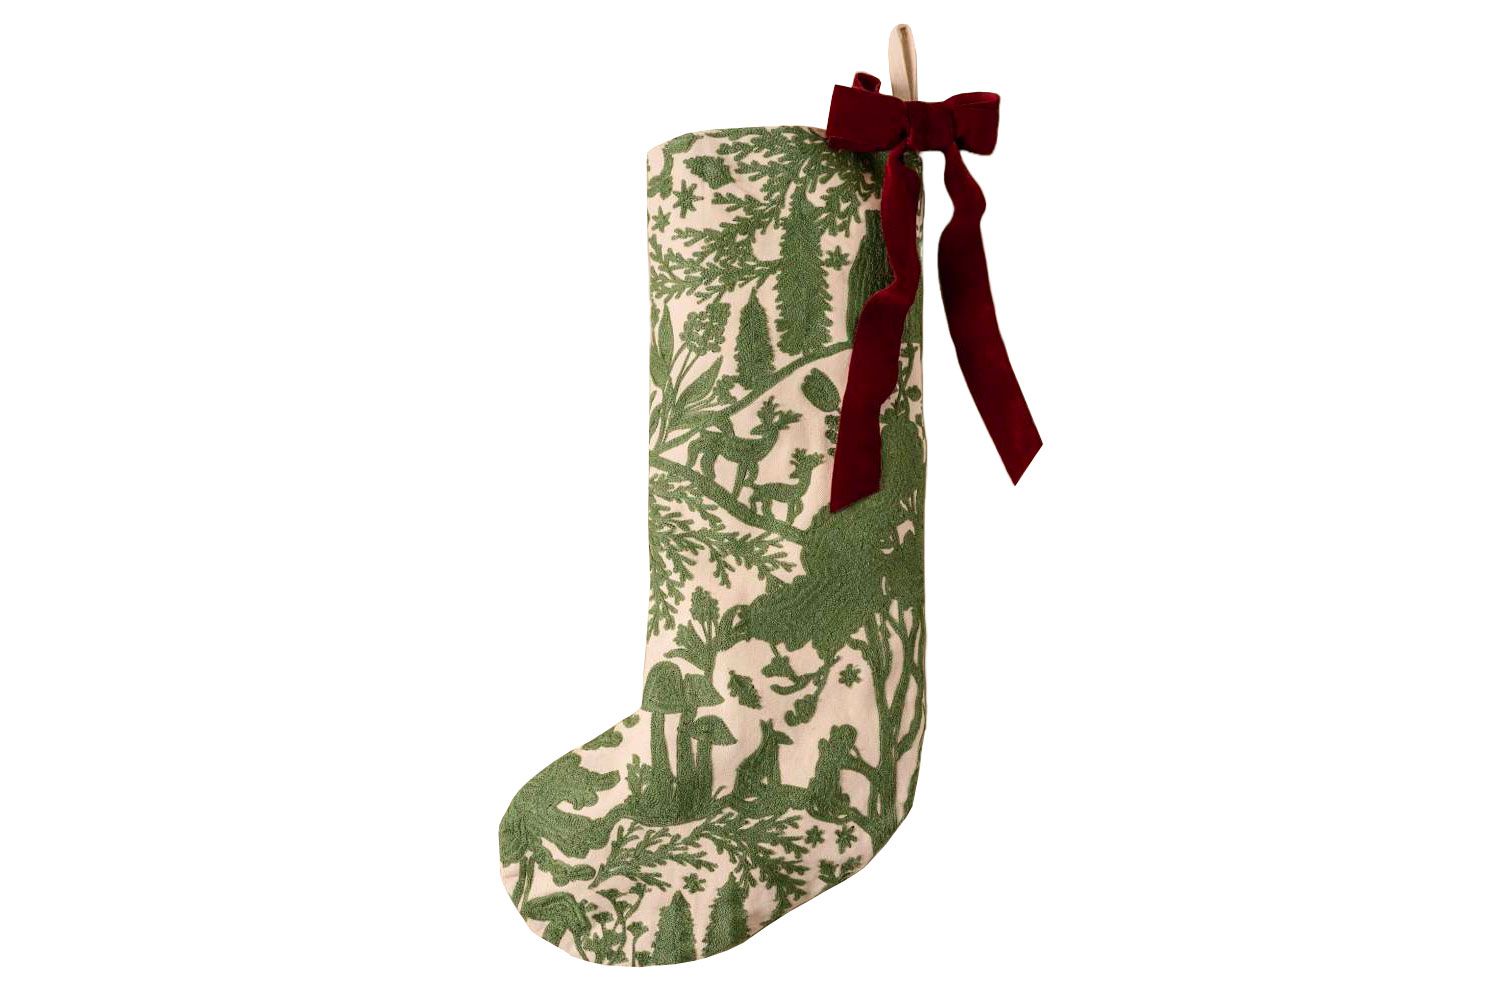 Folklore Embroidered Stocking